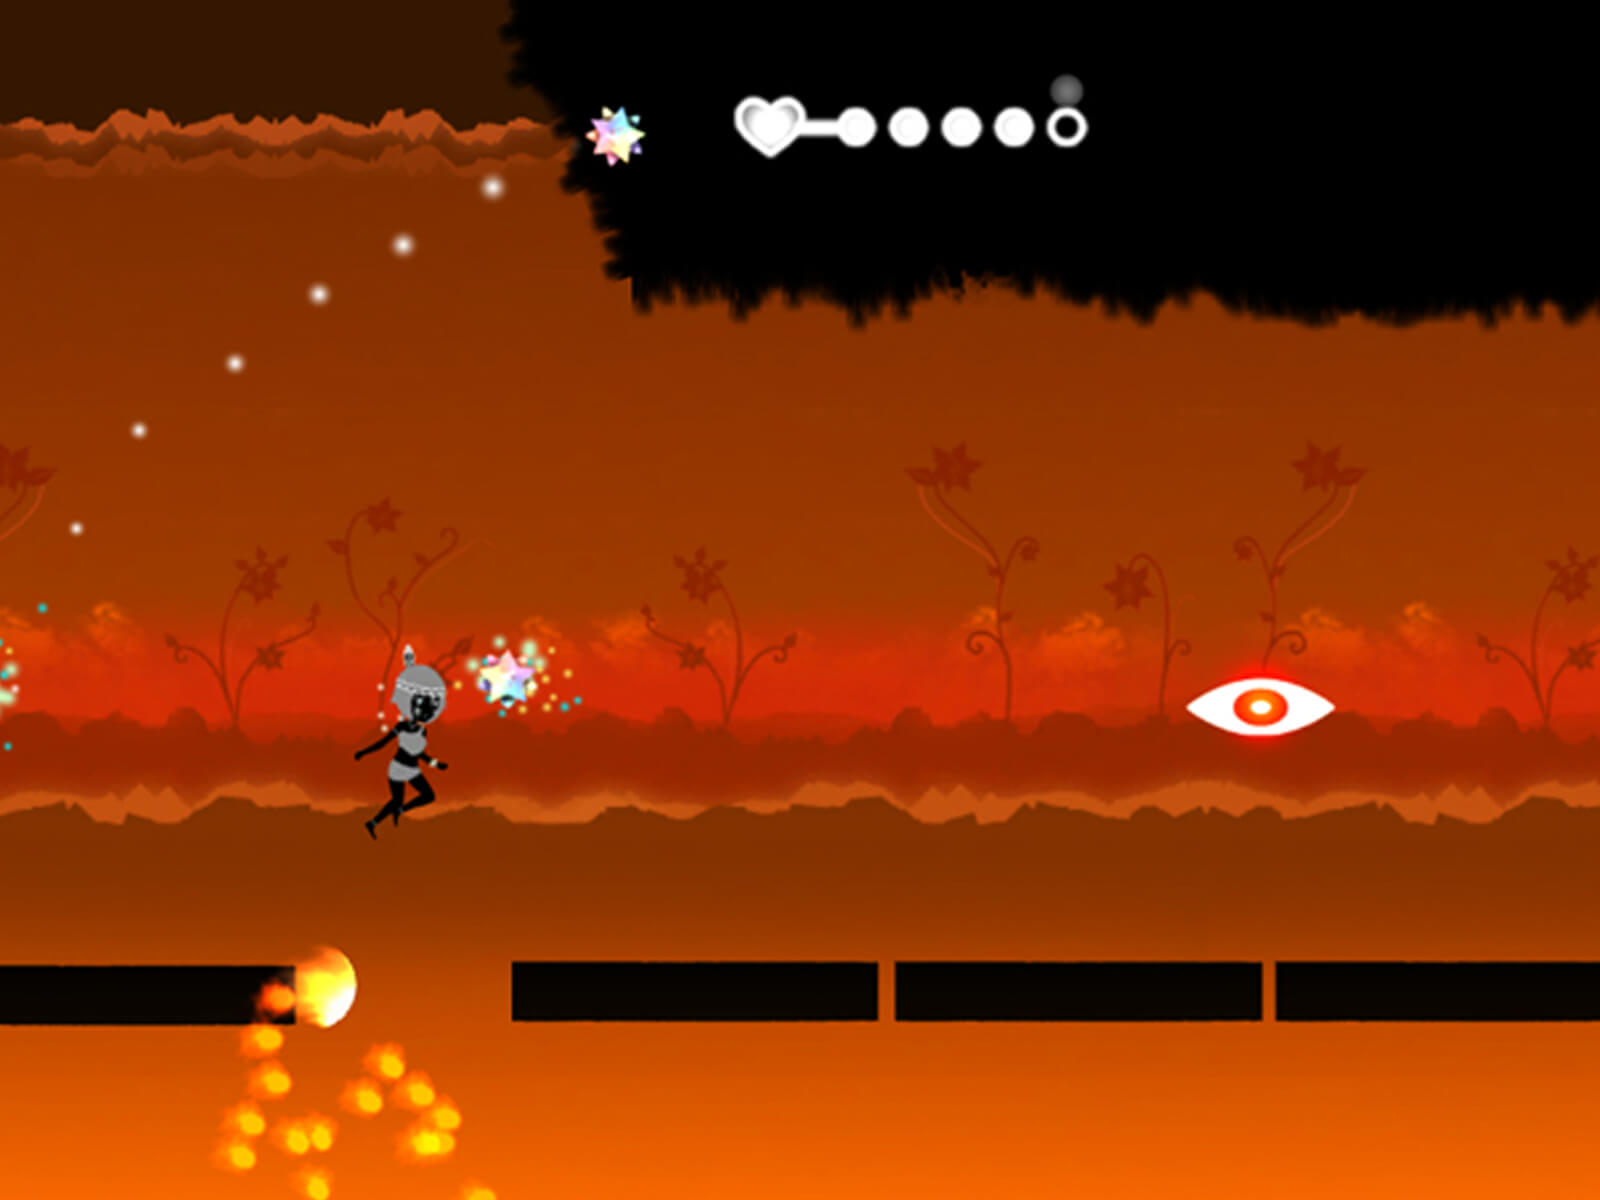 Screenshot from Iris, the 2D character hops onto a platform in a fiery level as two glowing eyes hover in the air ahead